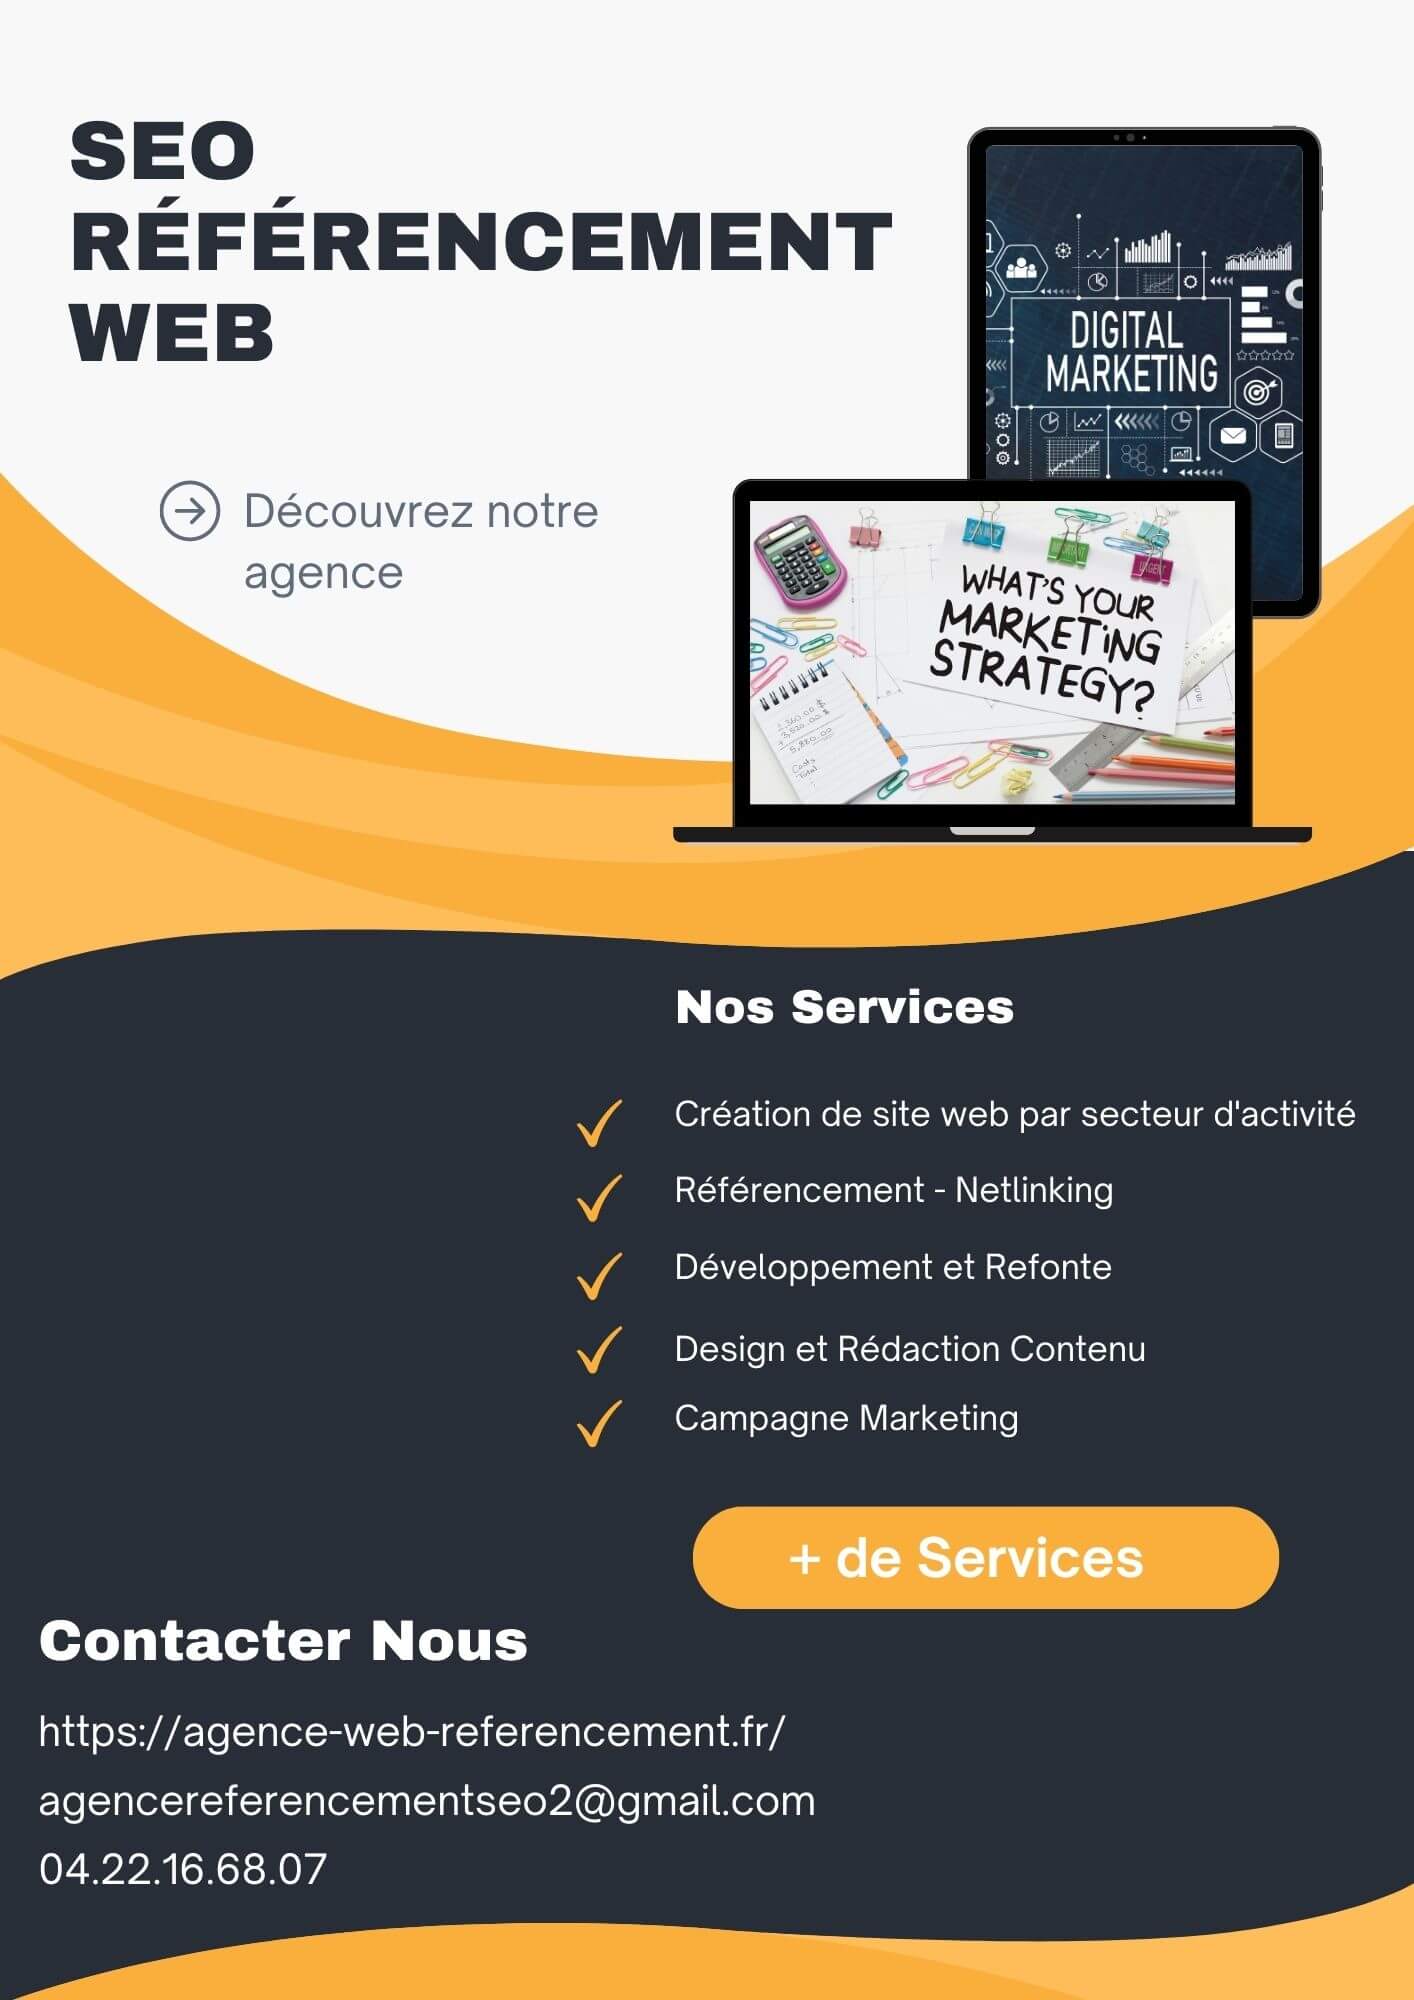 Newsletter Agence-web-referencement.fr (1)